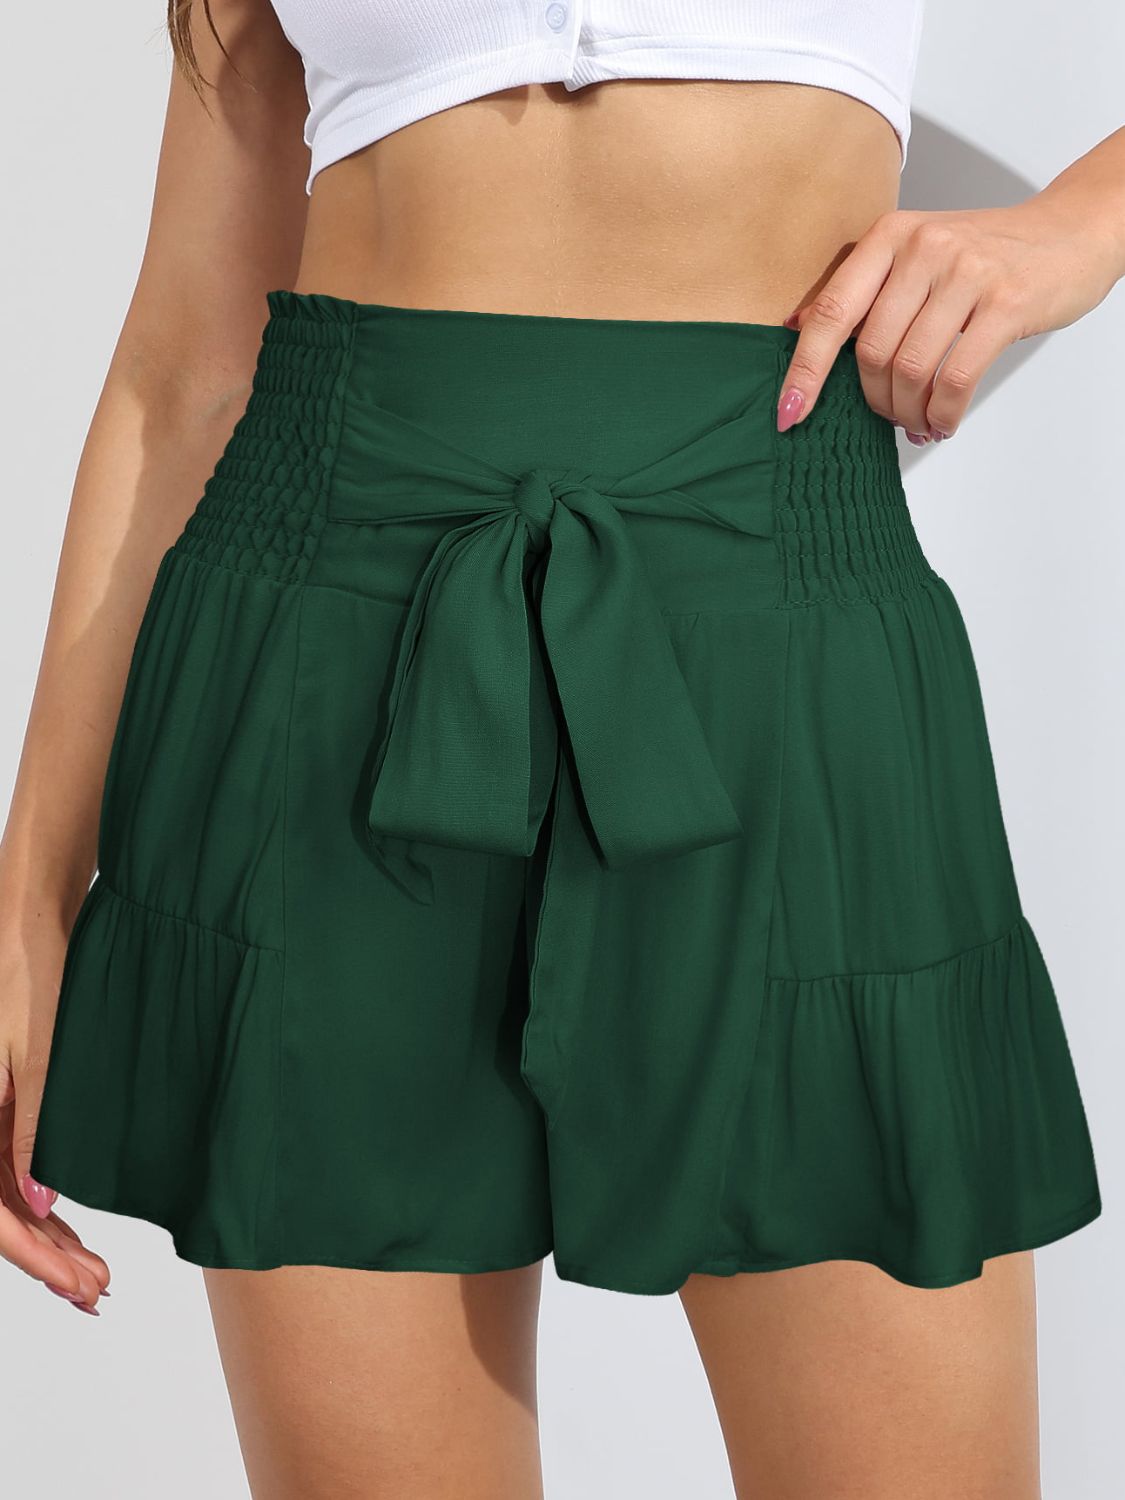 Smocked Tie-Front High-Rise Shorts - Green / S - Women’s Clothing & Accessories - Shorts - 13 - 2024